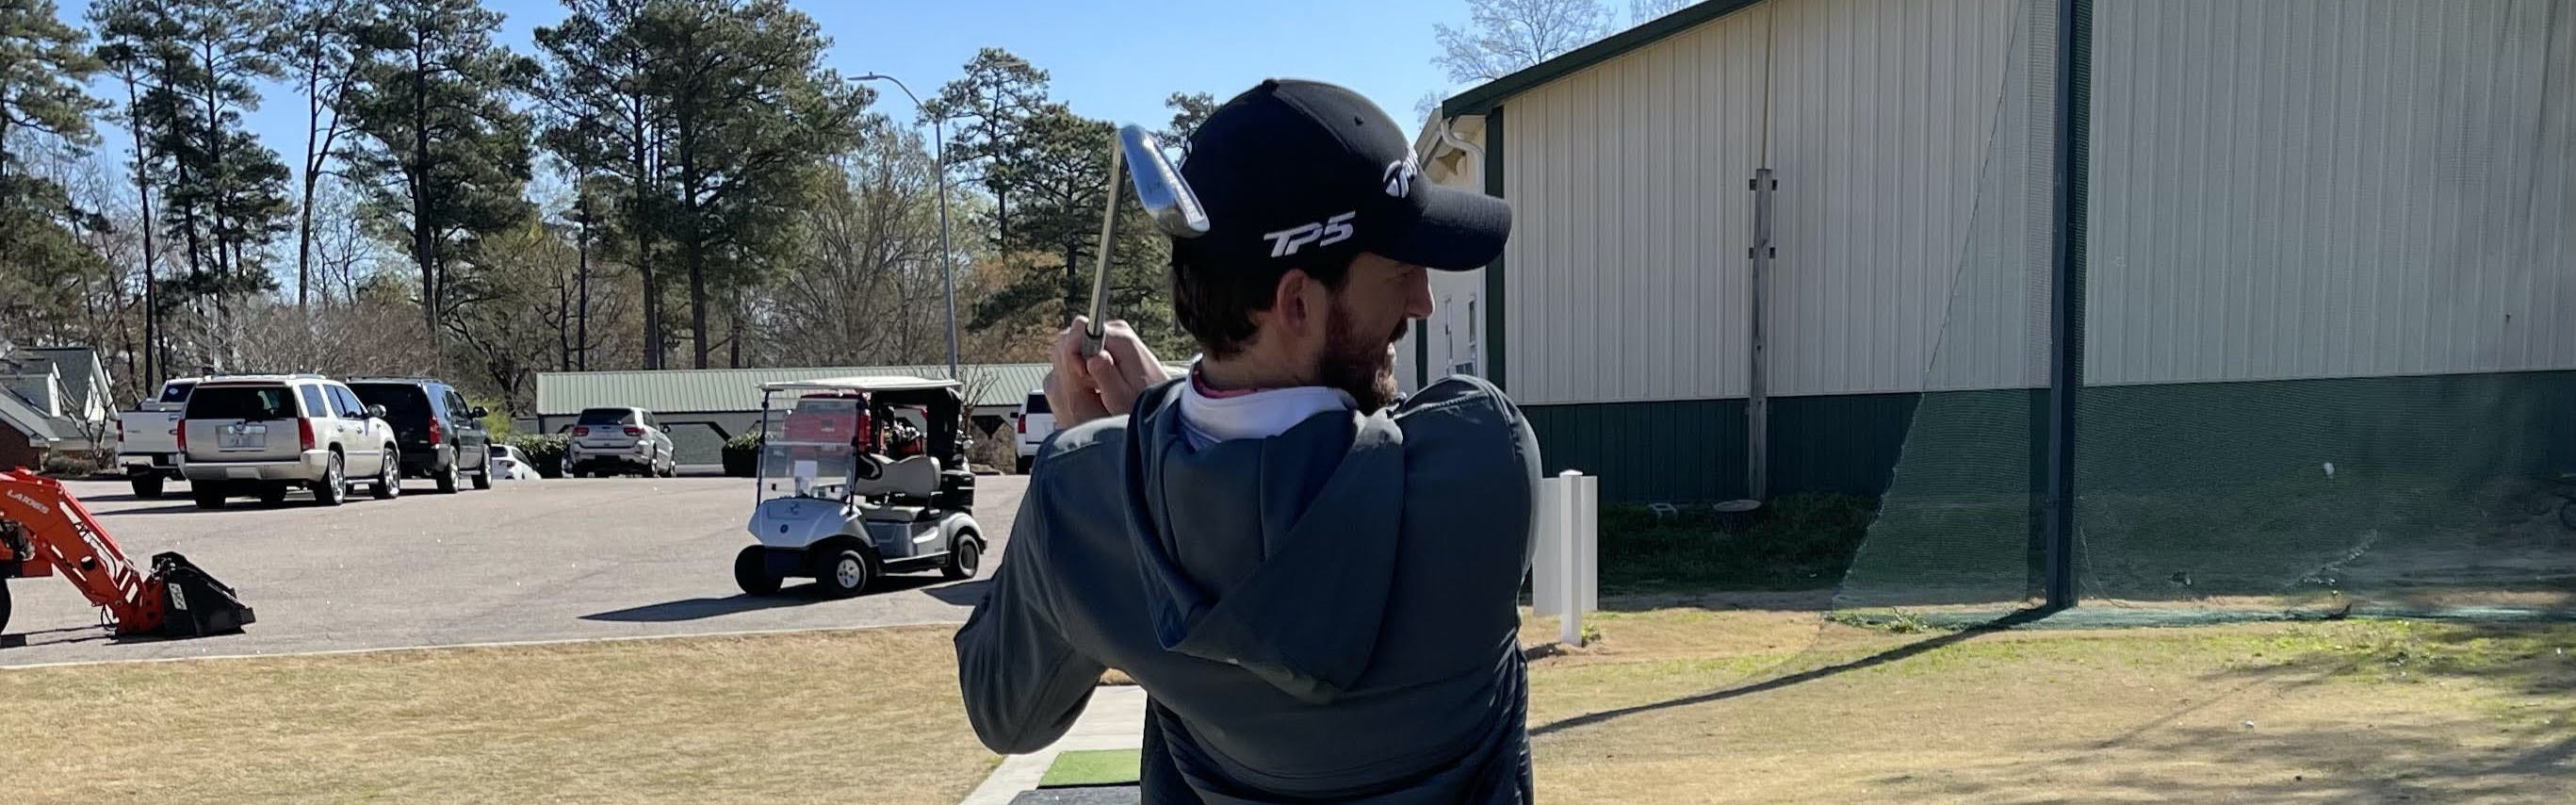 A golfer using the TaylorMade P760 Iron Set. 